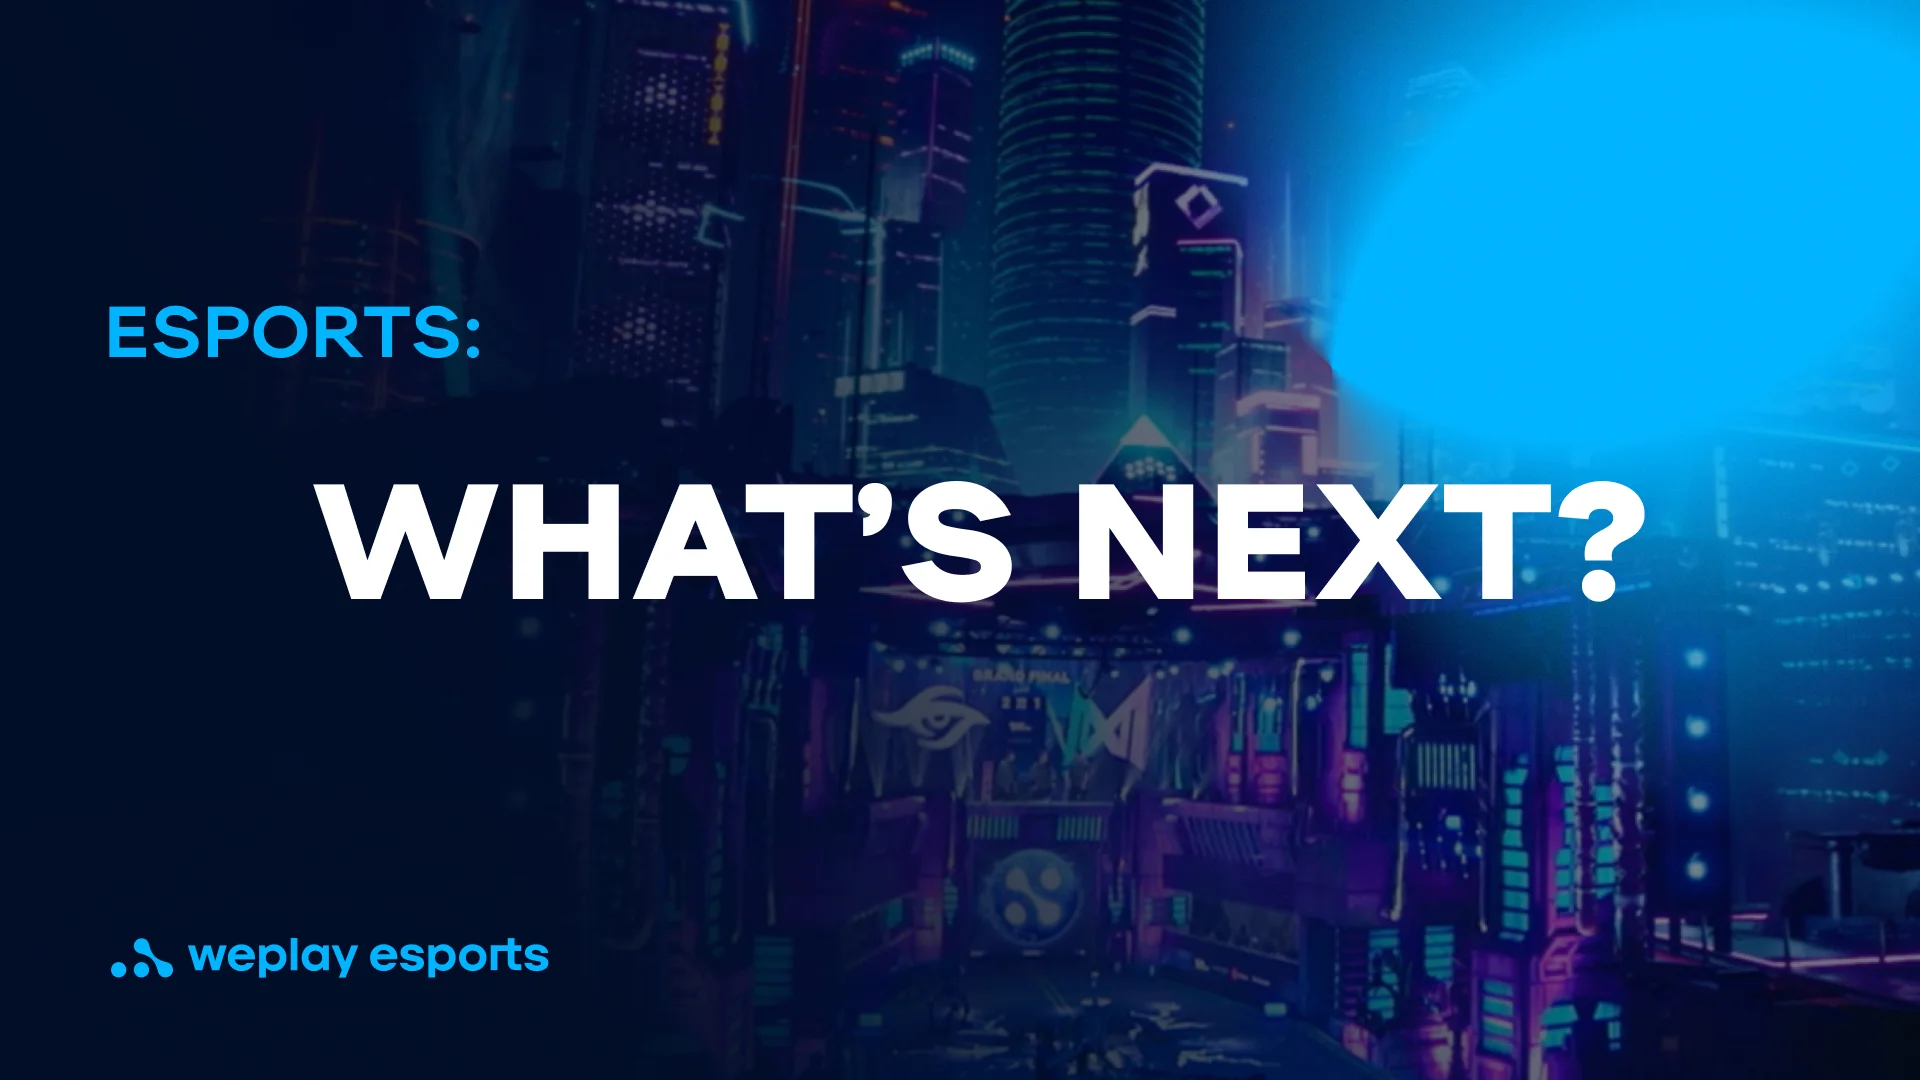 Esports: what’s next? Credit: WePlay Holding